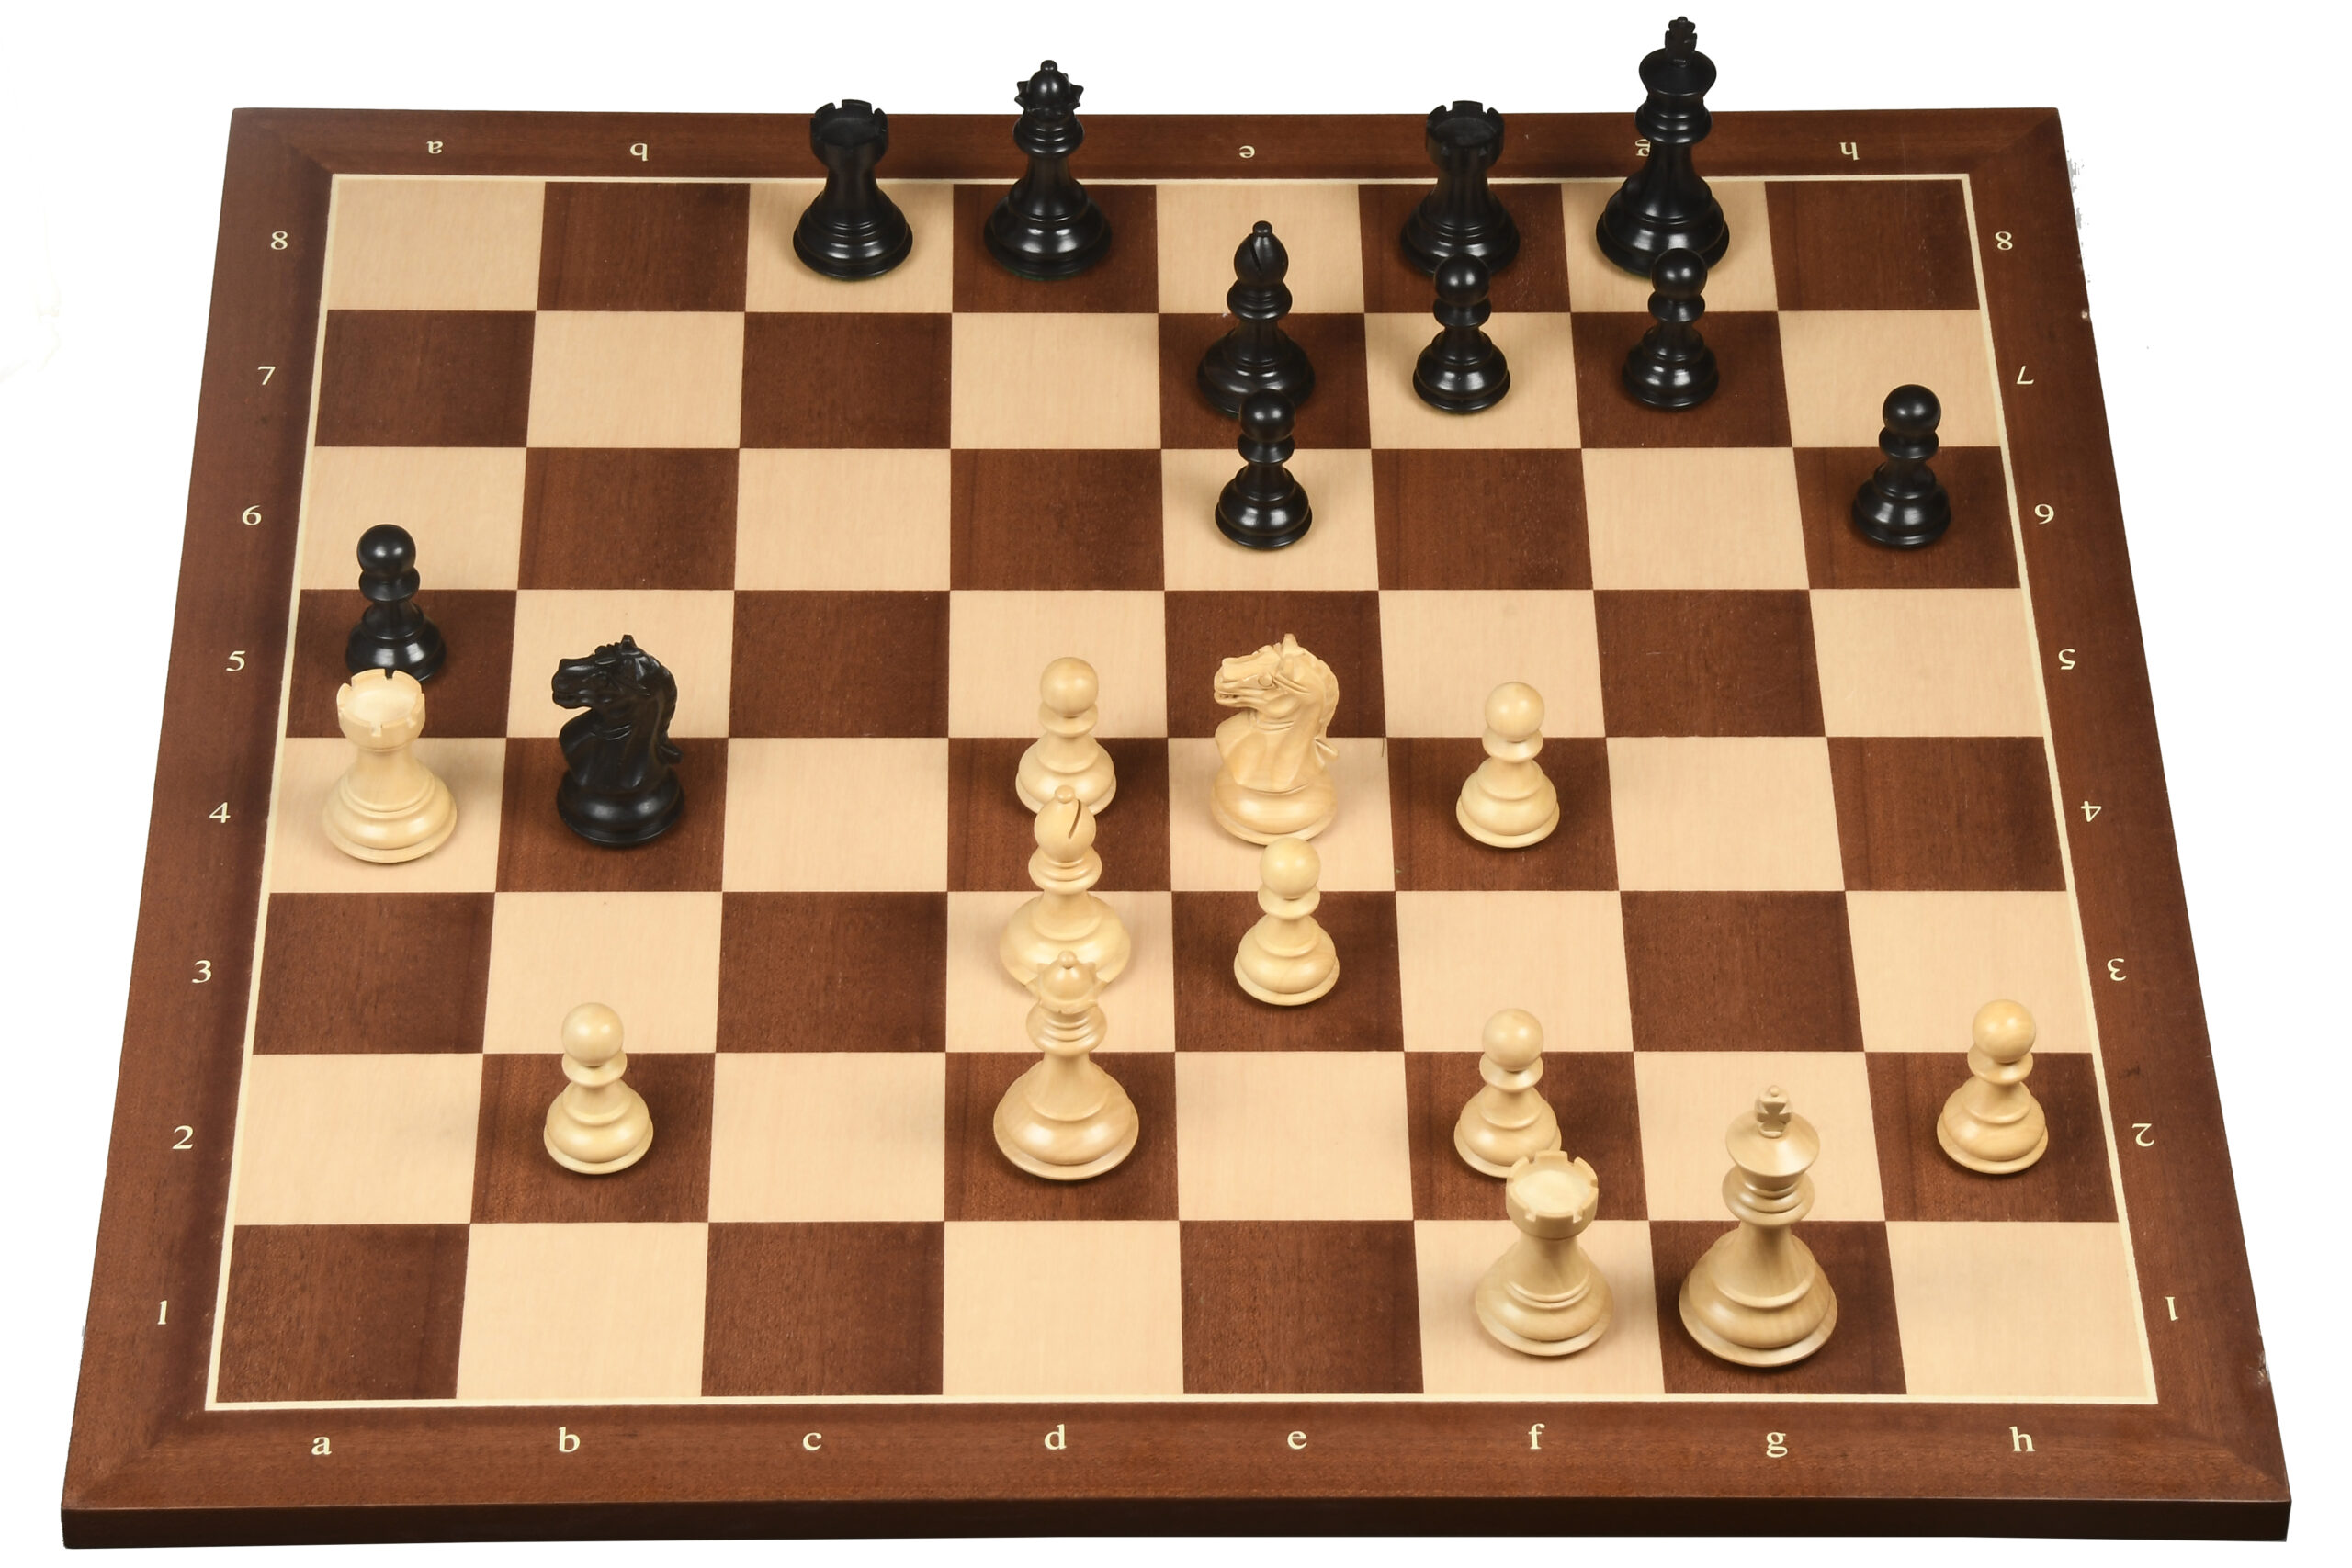 What's the best chess opening a beginner should play? - Quora